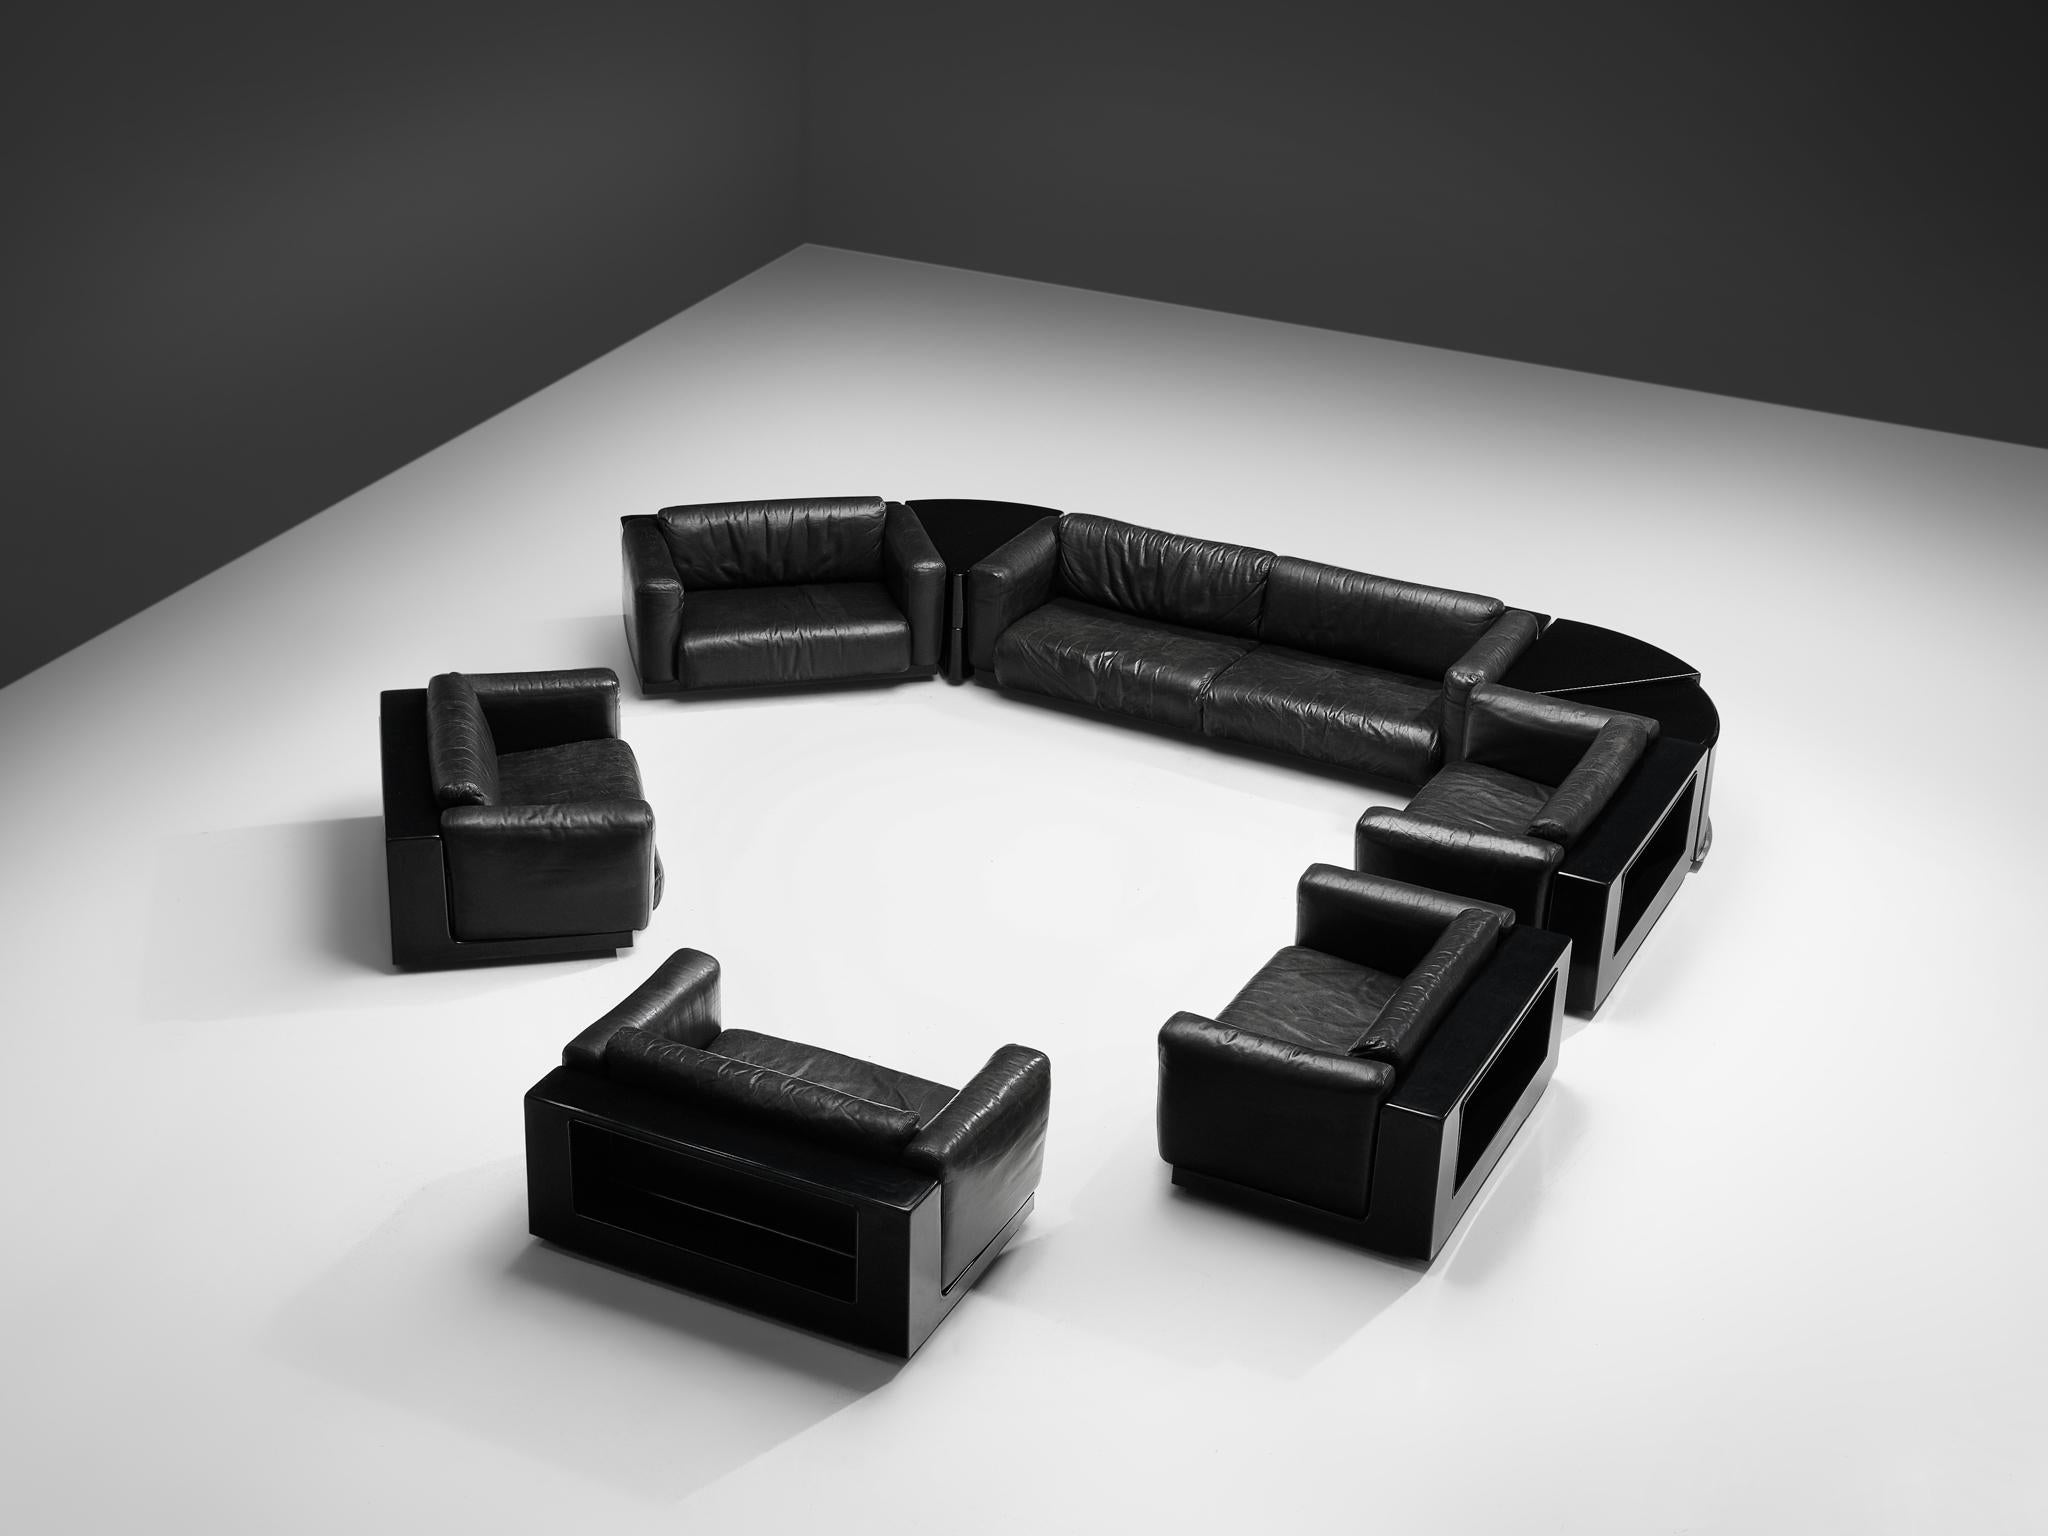 Cini Boeri for Knoll, modular set 'Gradual', black leather, fiberglass, Italy, 1970s.

This stunning black sectional sofa set was designed by Cini Boeri for Knoll. This it consists out of a three-seat sofa, five lounge chairs and two triangle side